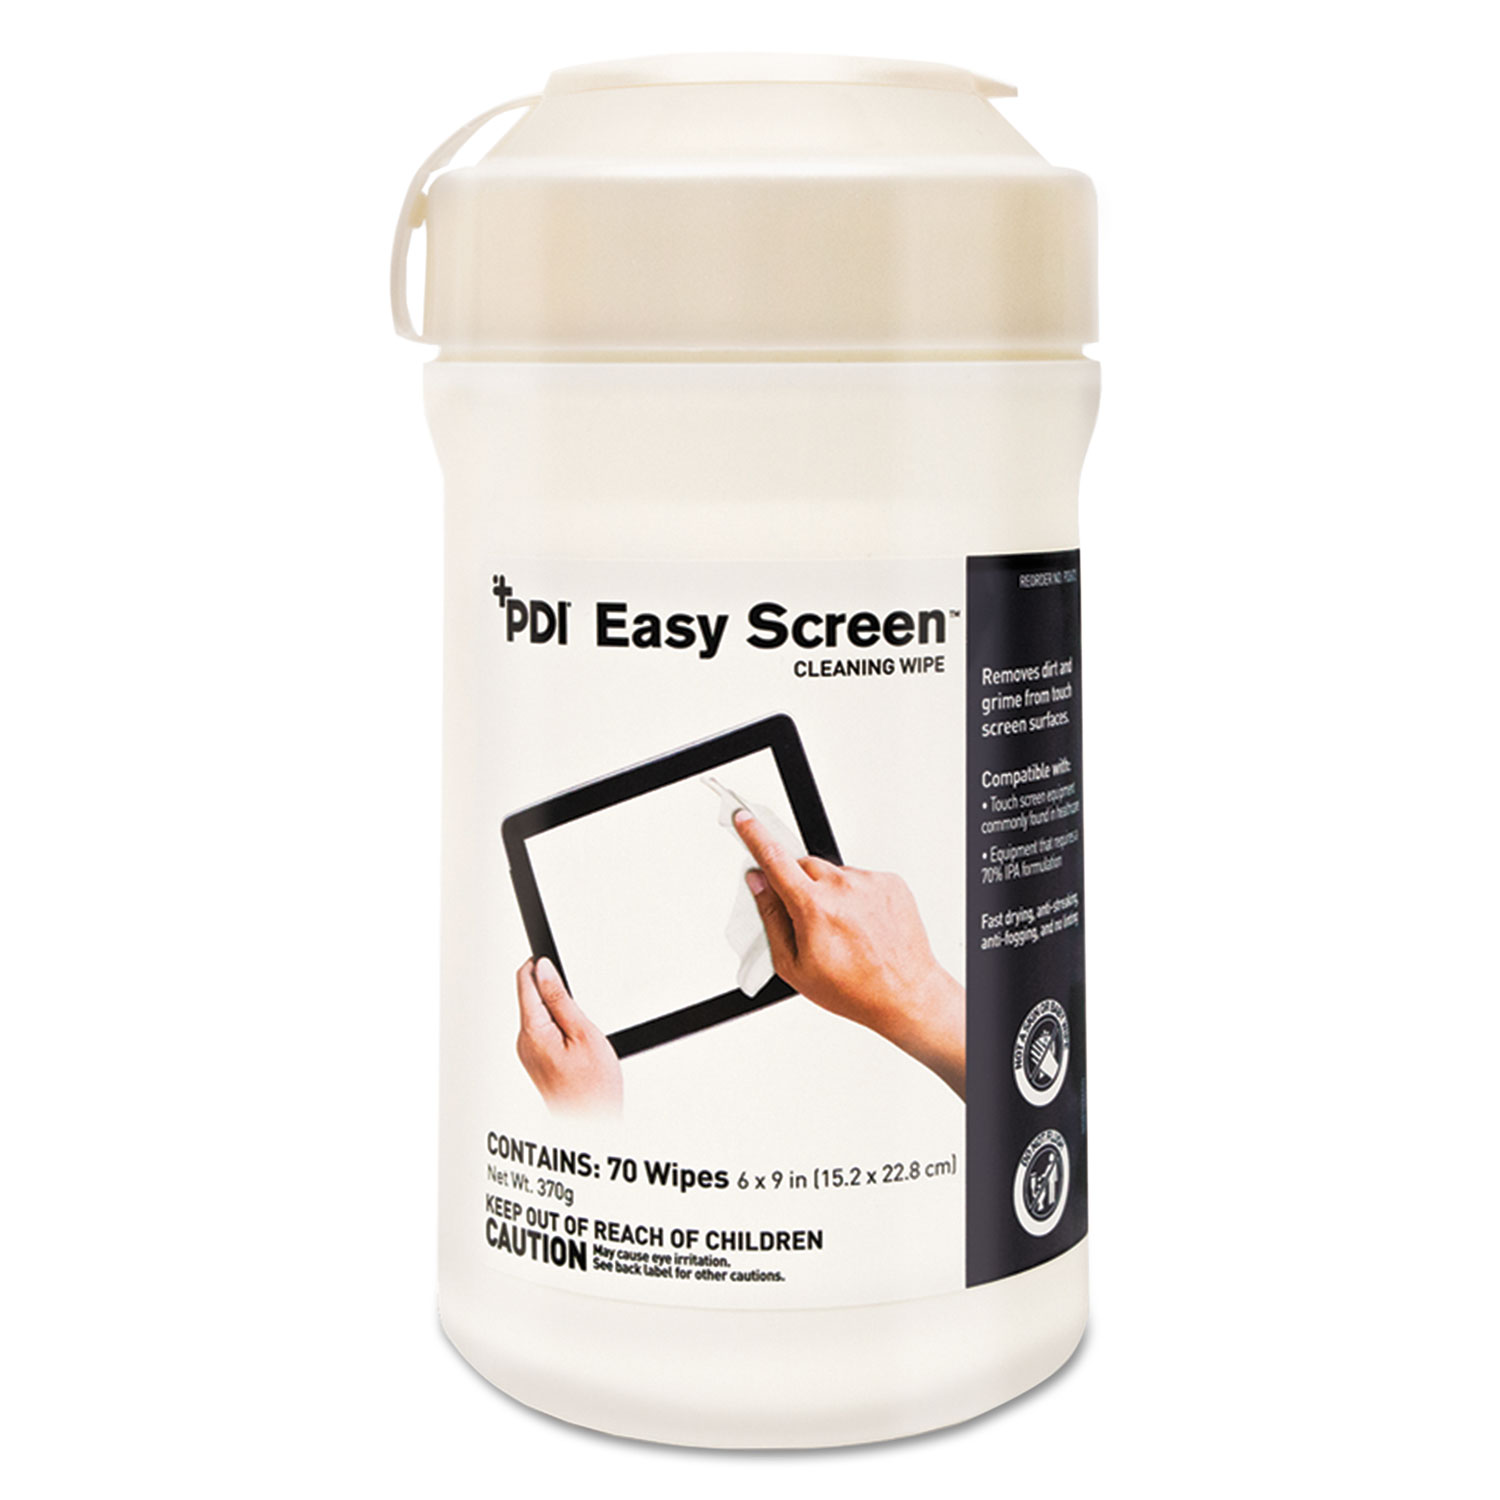  Sani Professional P03672 PDI Easy Screen Cleaning Wipes, 9 x 6, White, 70/Canister, 12/Ctn (NICP03672) 